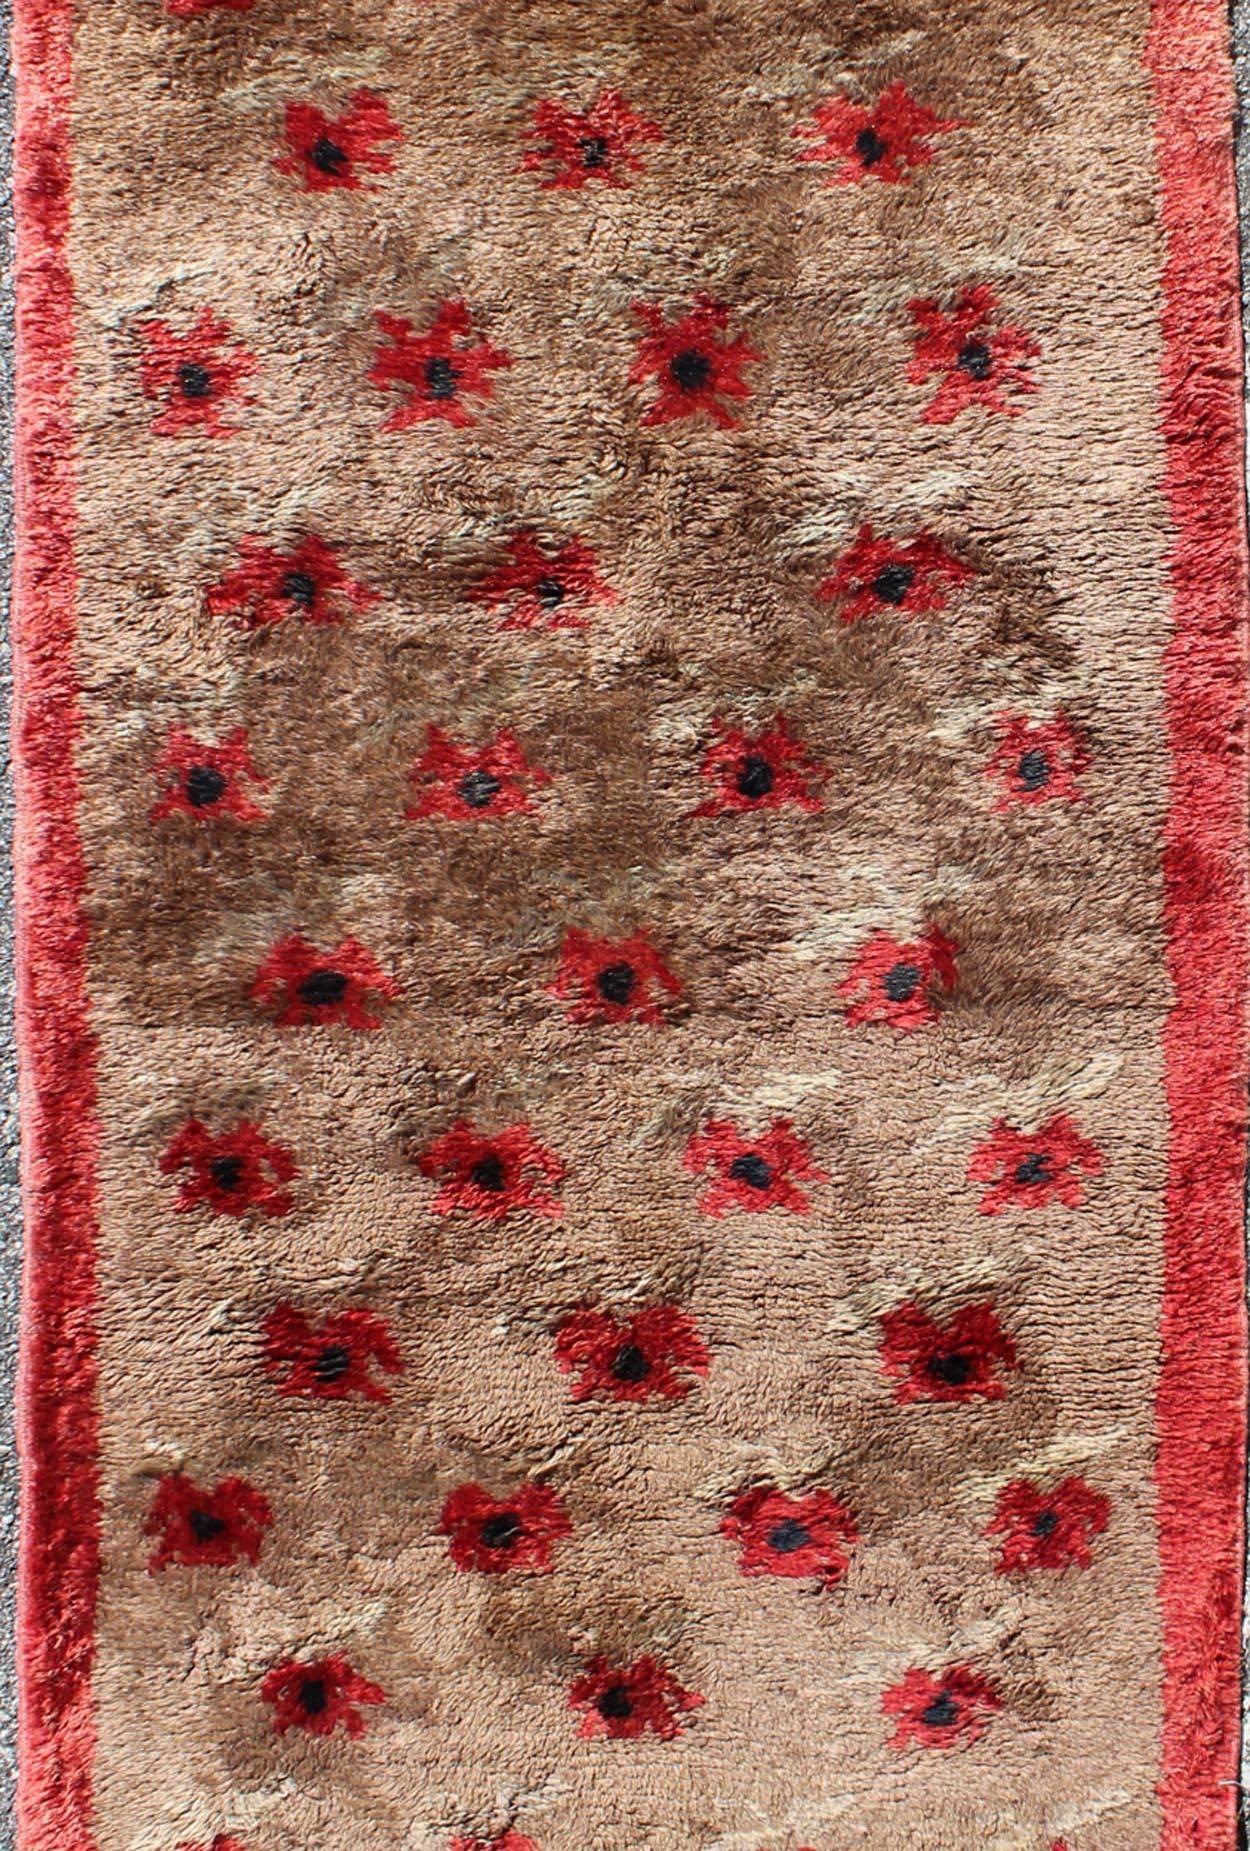 Midcentury Turkish Tulu Rug with Floating Flowers Design in Light Camel & Red In Excellent Condition For Sale In Atlanta, GA